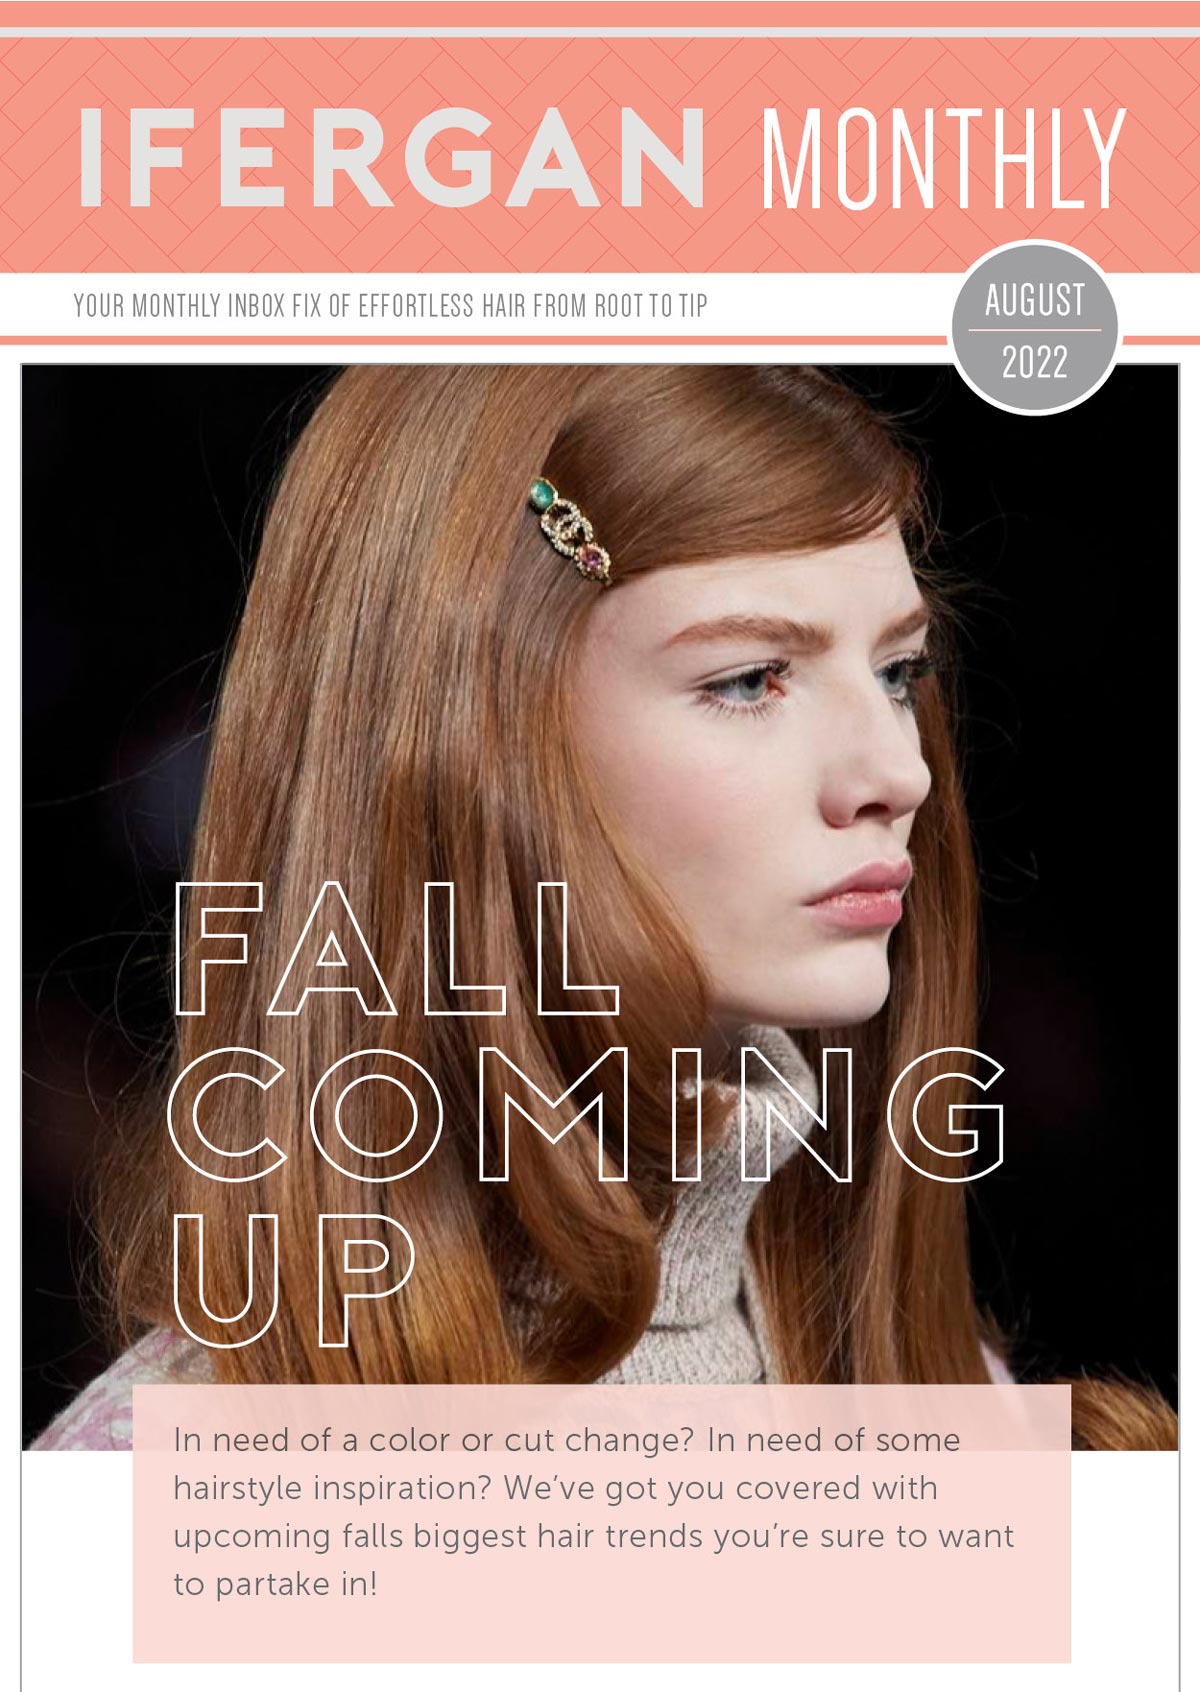 August Newsletter Fall Coming up! In need of a color or cut change? In need of some hairstyle inspiration? We’ve got you covered with upcoming falls biggest hair trends you’re sure to want to partake in! Forget the Gold! Bronze will take center stage this fall as the hair color-to-have and isn’t It just dreamy? We love the subtle warmth in this brown hair color which works on so many skin tones!